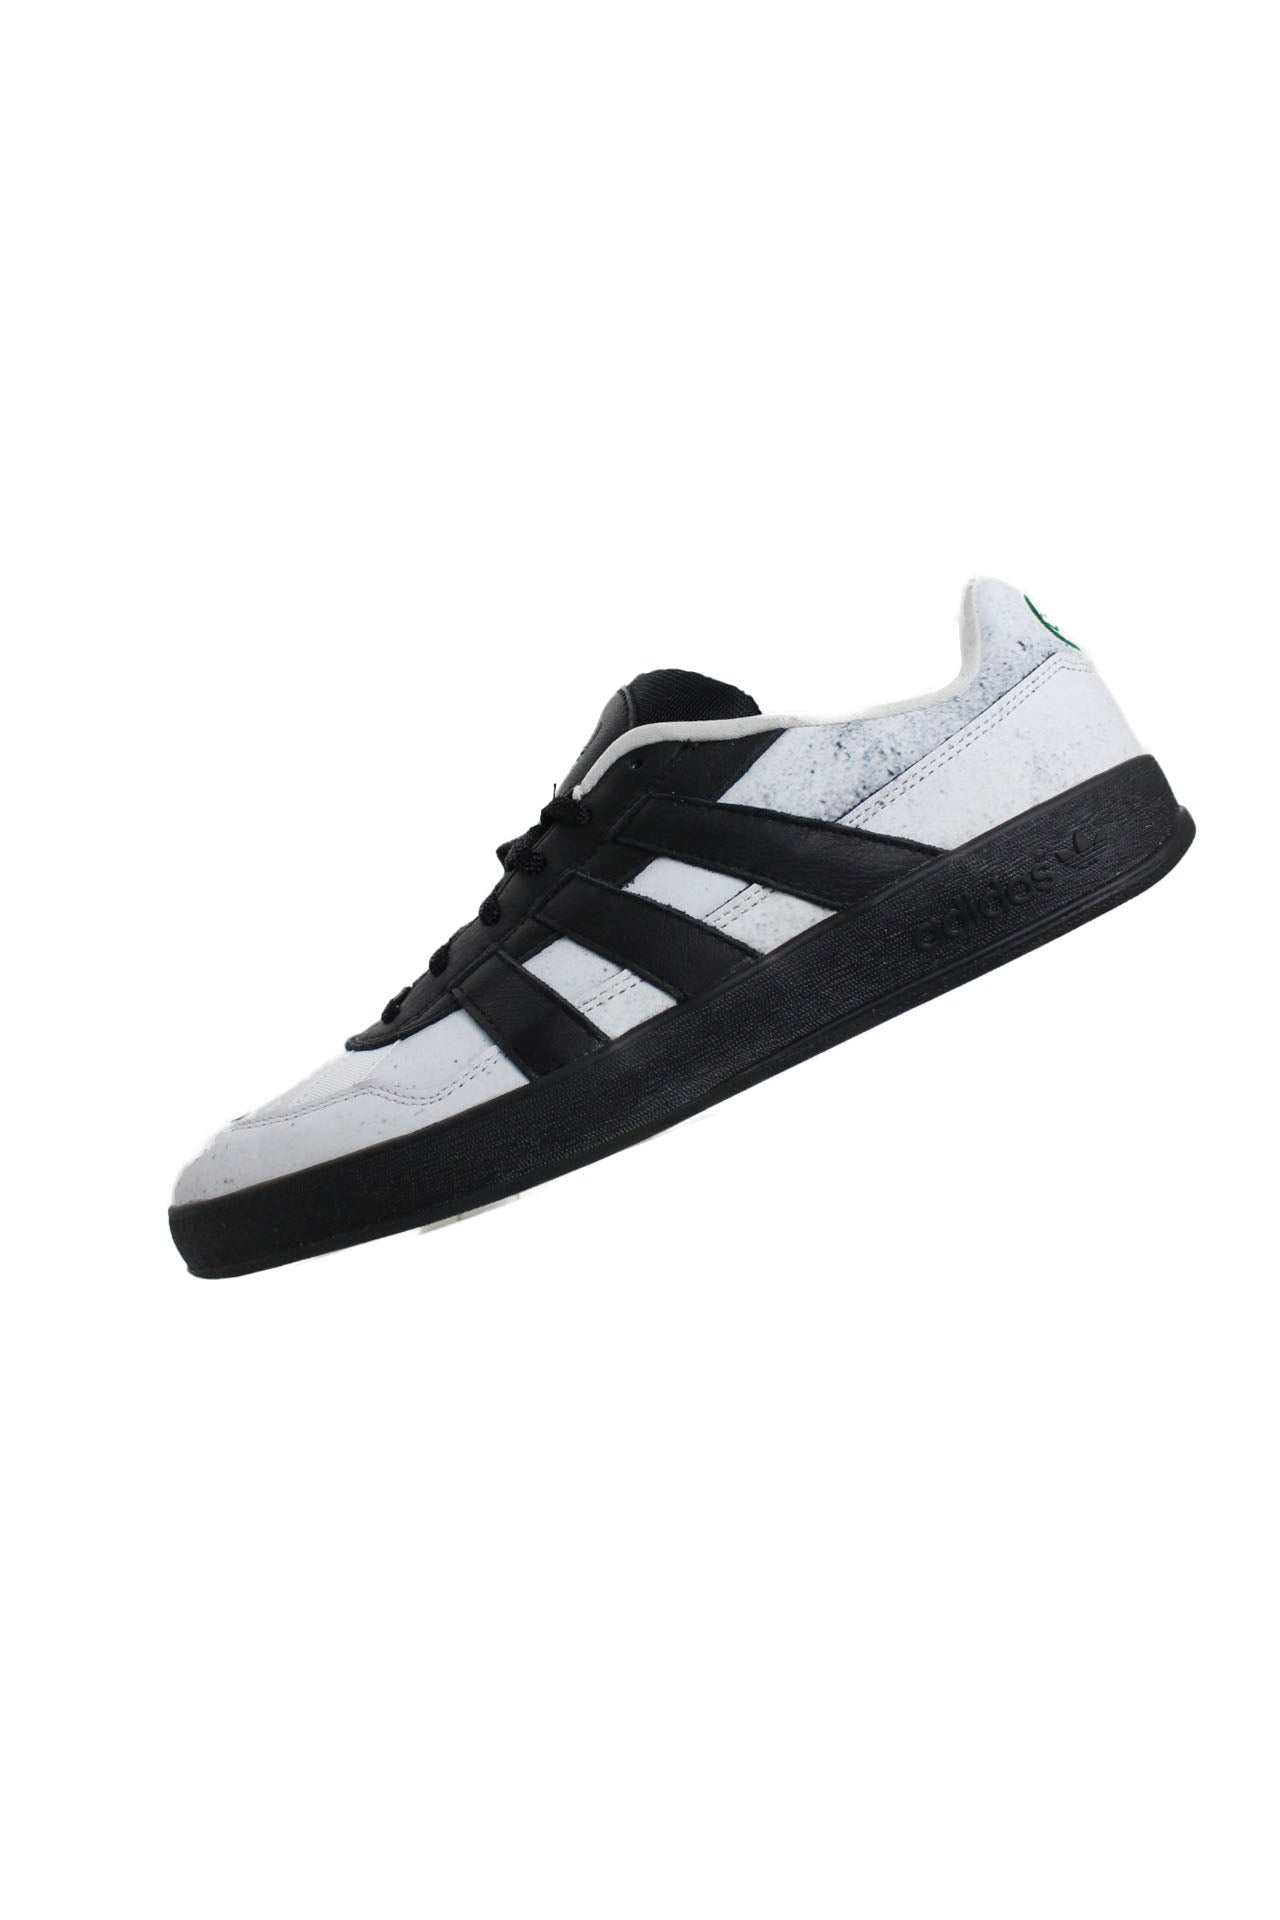 side view of adidas white/black ‘mark gonzales aloha super’ leather shoes. features adidas shmoo logo tag at tongue, ‘mg’ gonz art embroidered at heel, signature stripes at uppers sides, and ‘adidas’ logo embossed at rubber sole.